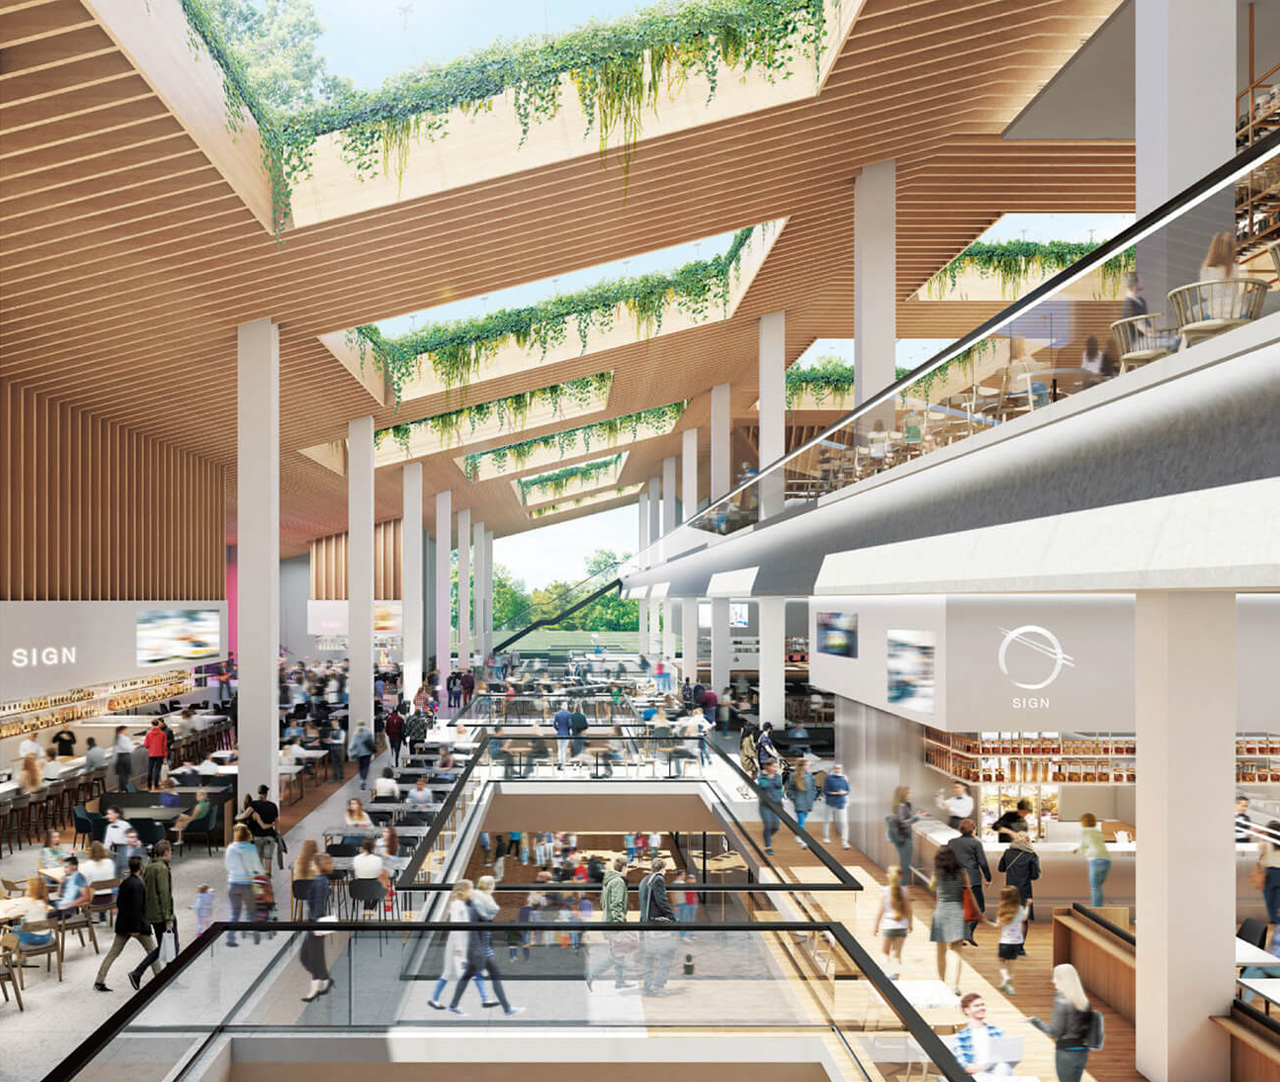 Rendering of the proposed foodhall at the Oakridge redevelopment.